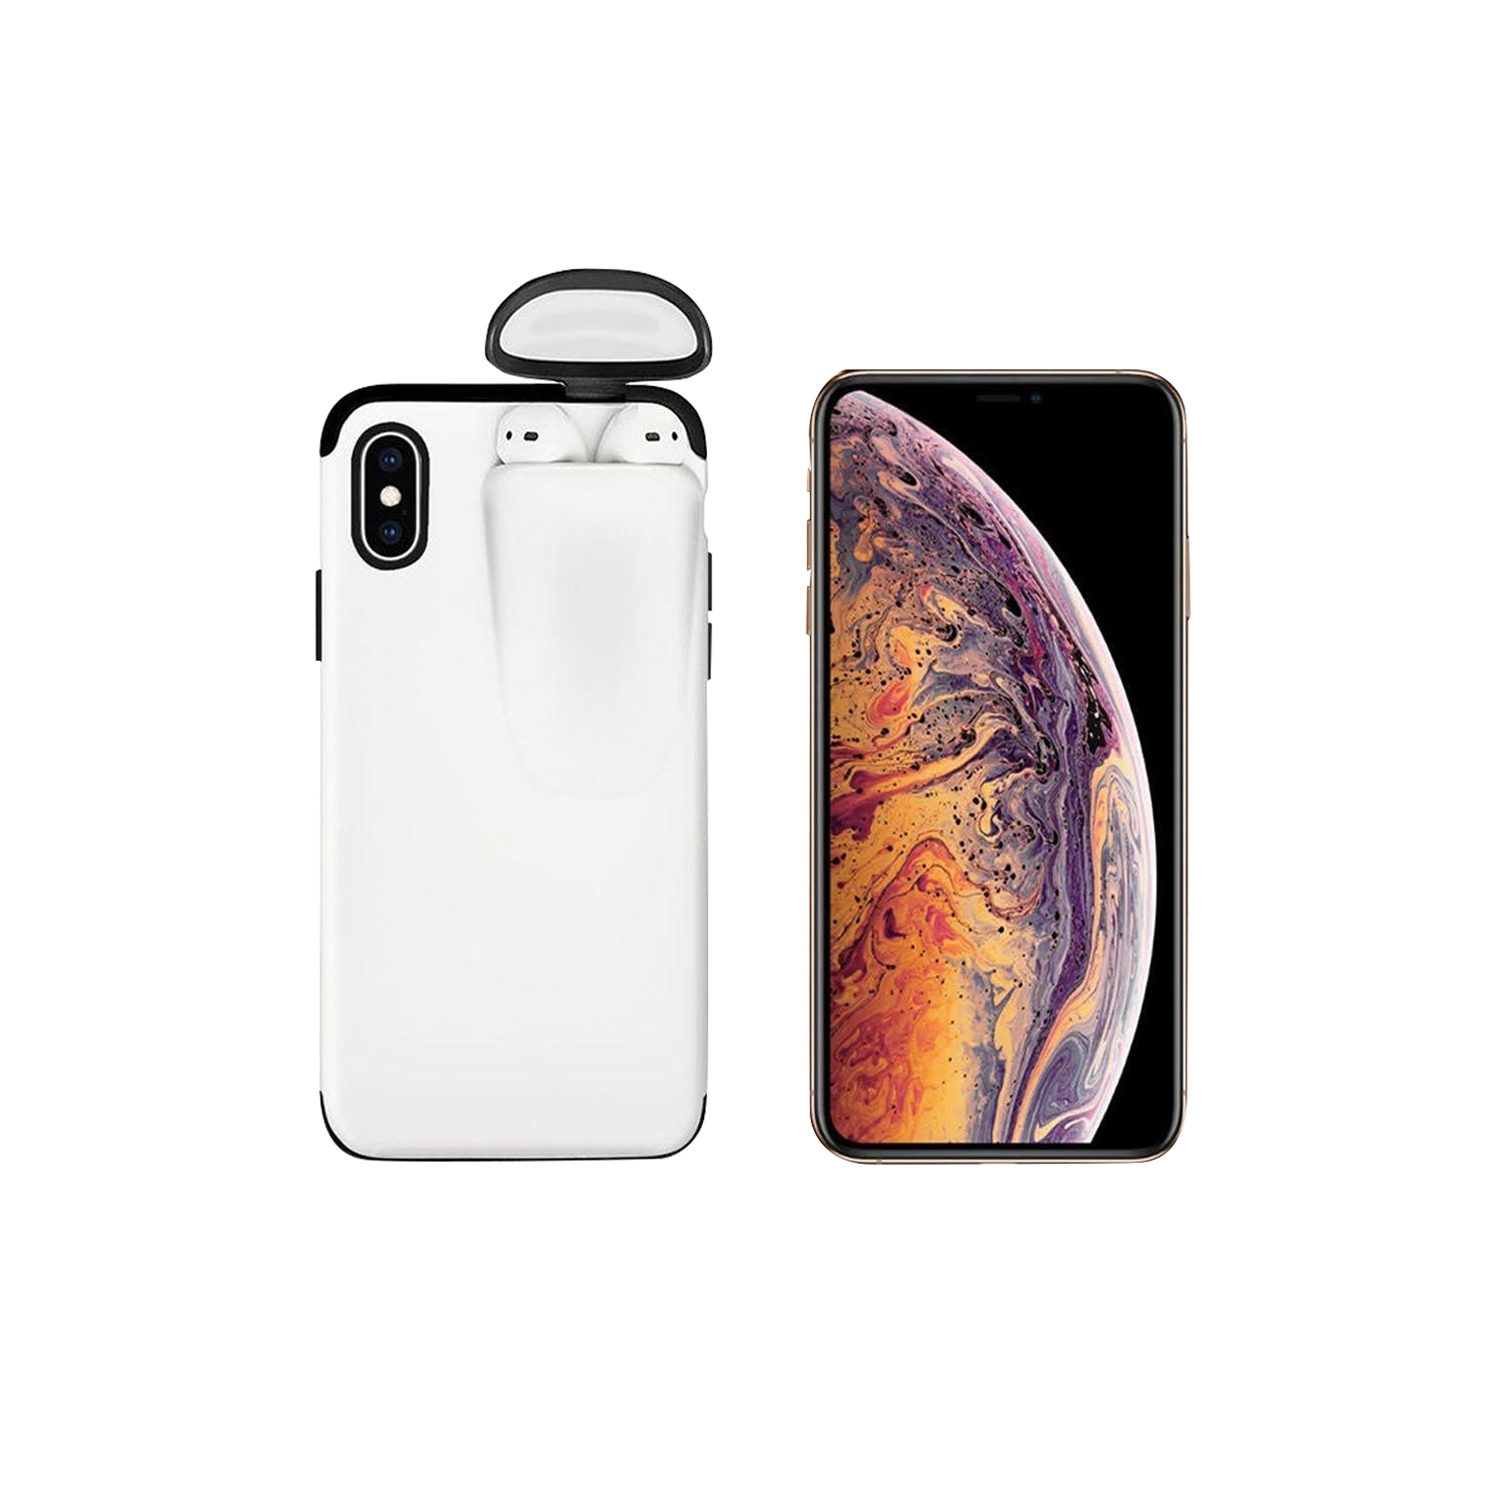 Unified Protection Silicone Gel Rubber 2 in 1 AirPods Phone Cover Case For Apple iPhone XS Max (AirPods 1/2 Only) -White